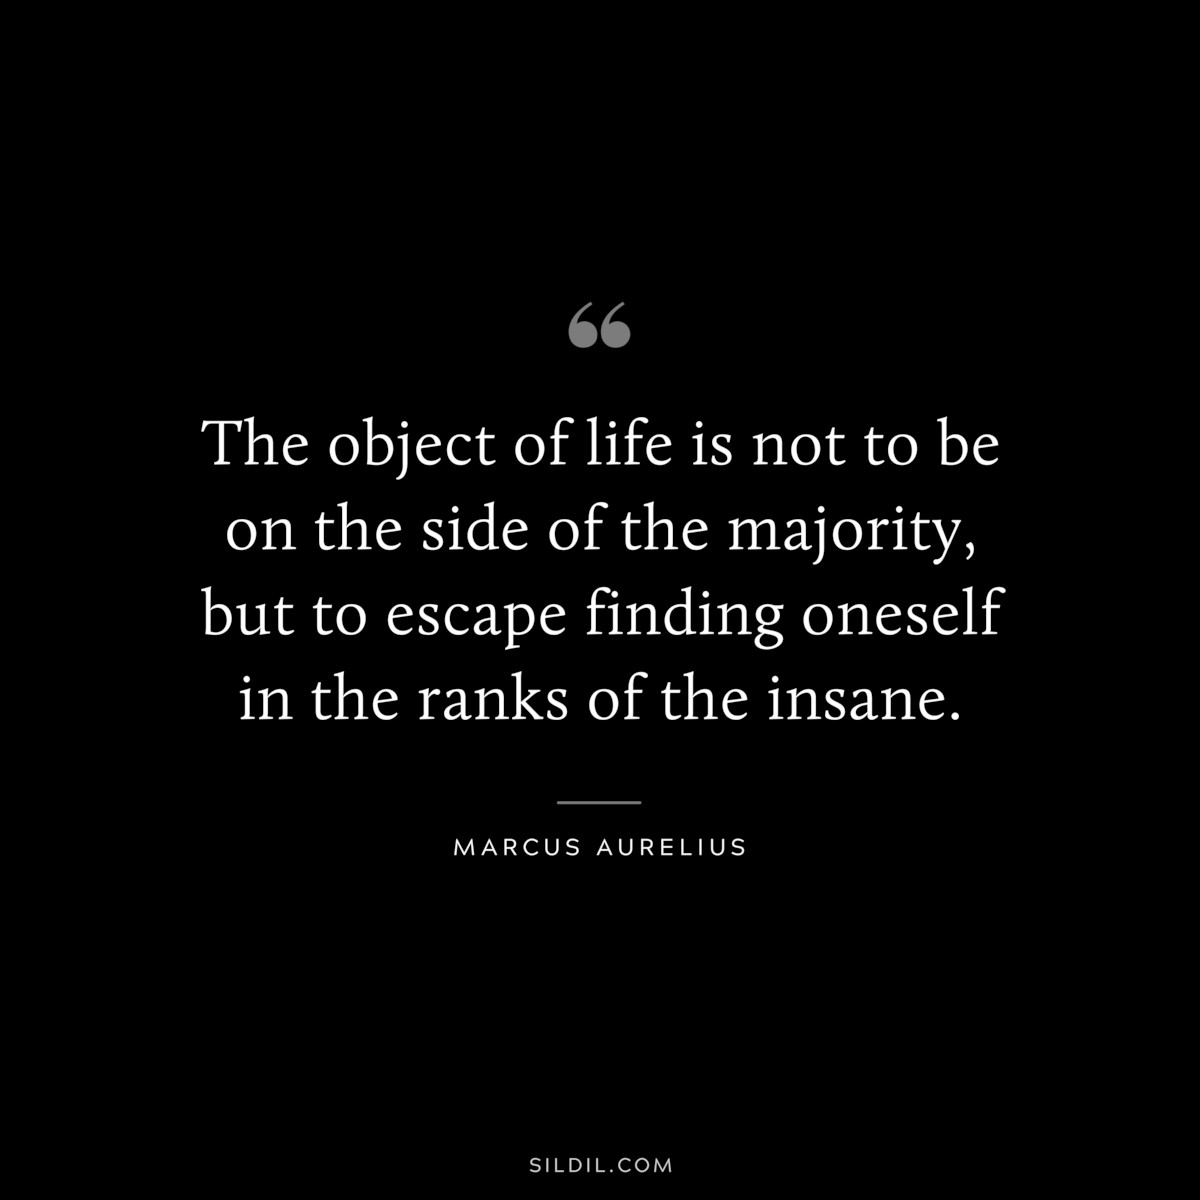 The object of life is not to be on the side of the majority, but to escape finding oneself in the ranks of the insane. ― Marcus Aurelius